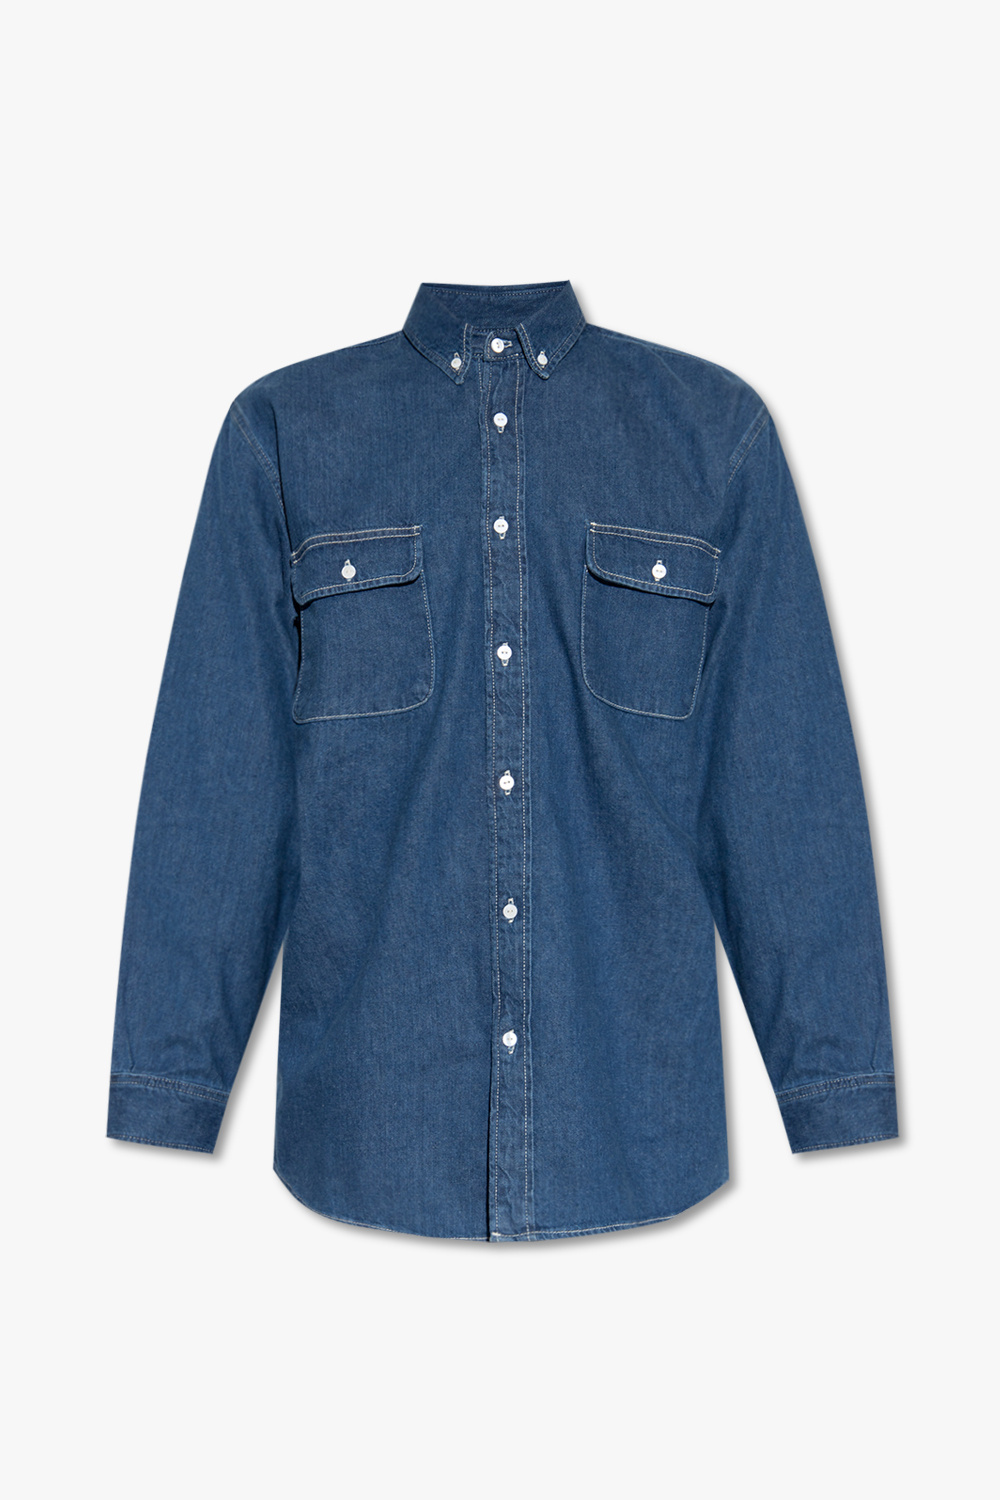 Levi's ‘Made & Crafted®’ collection shirt